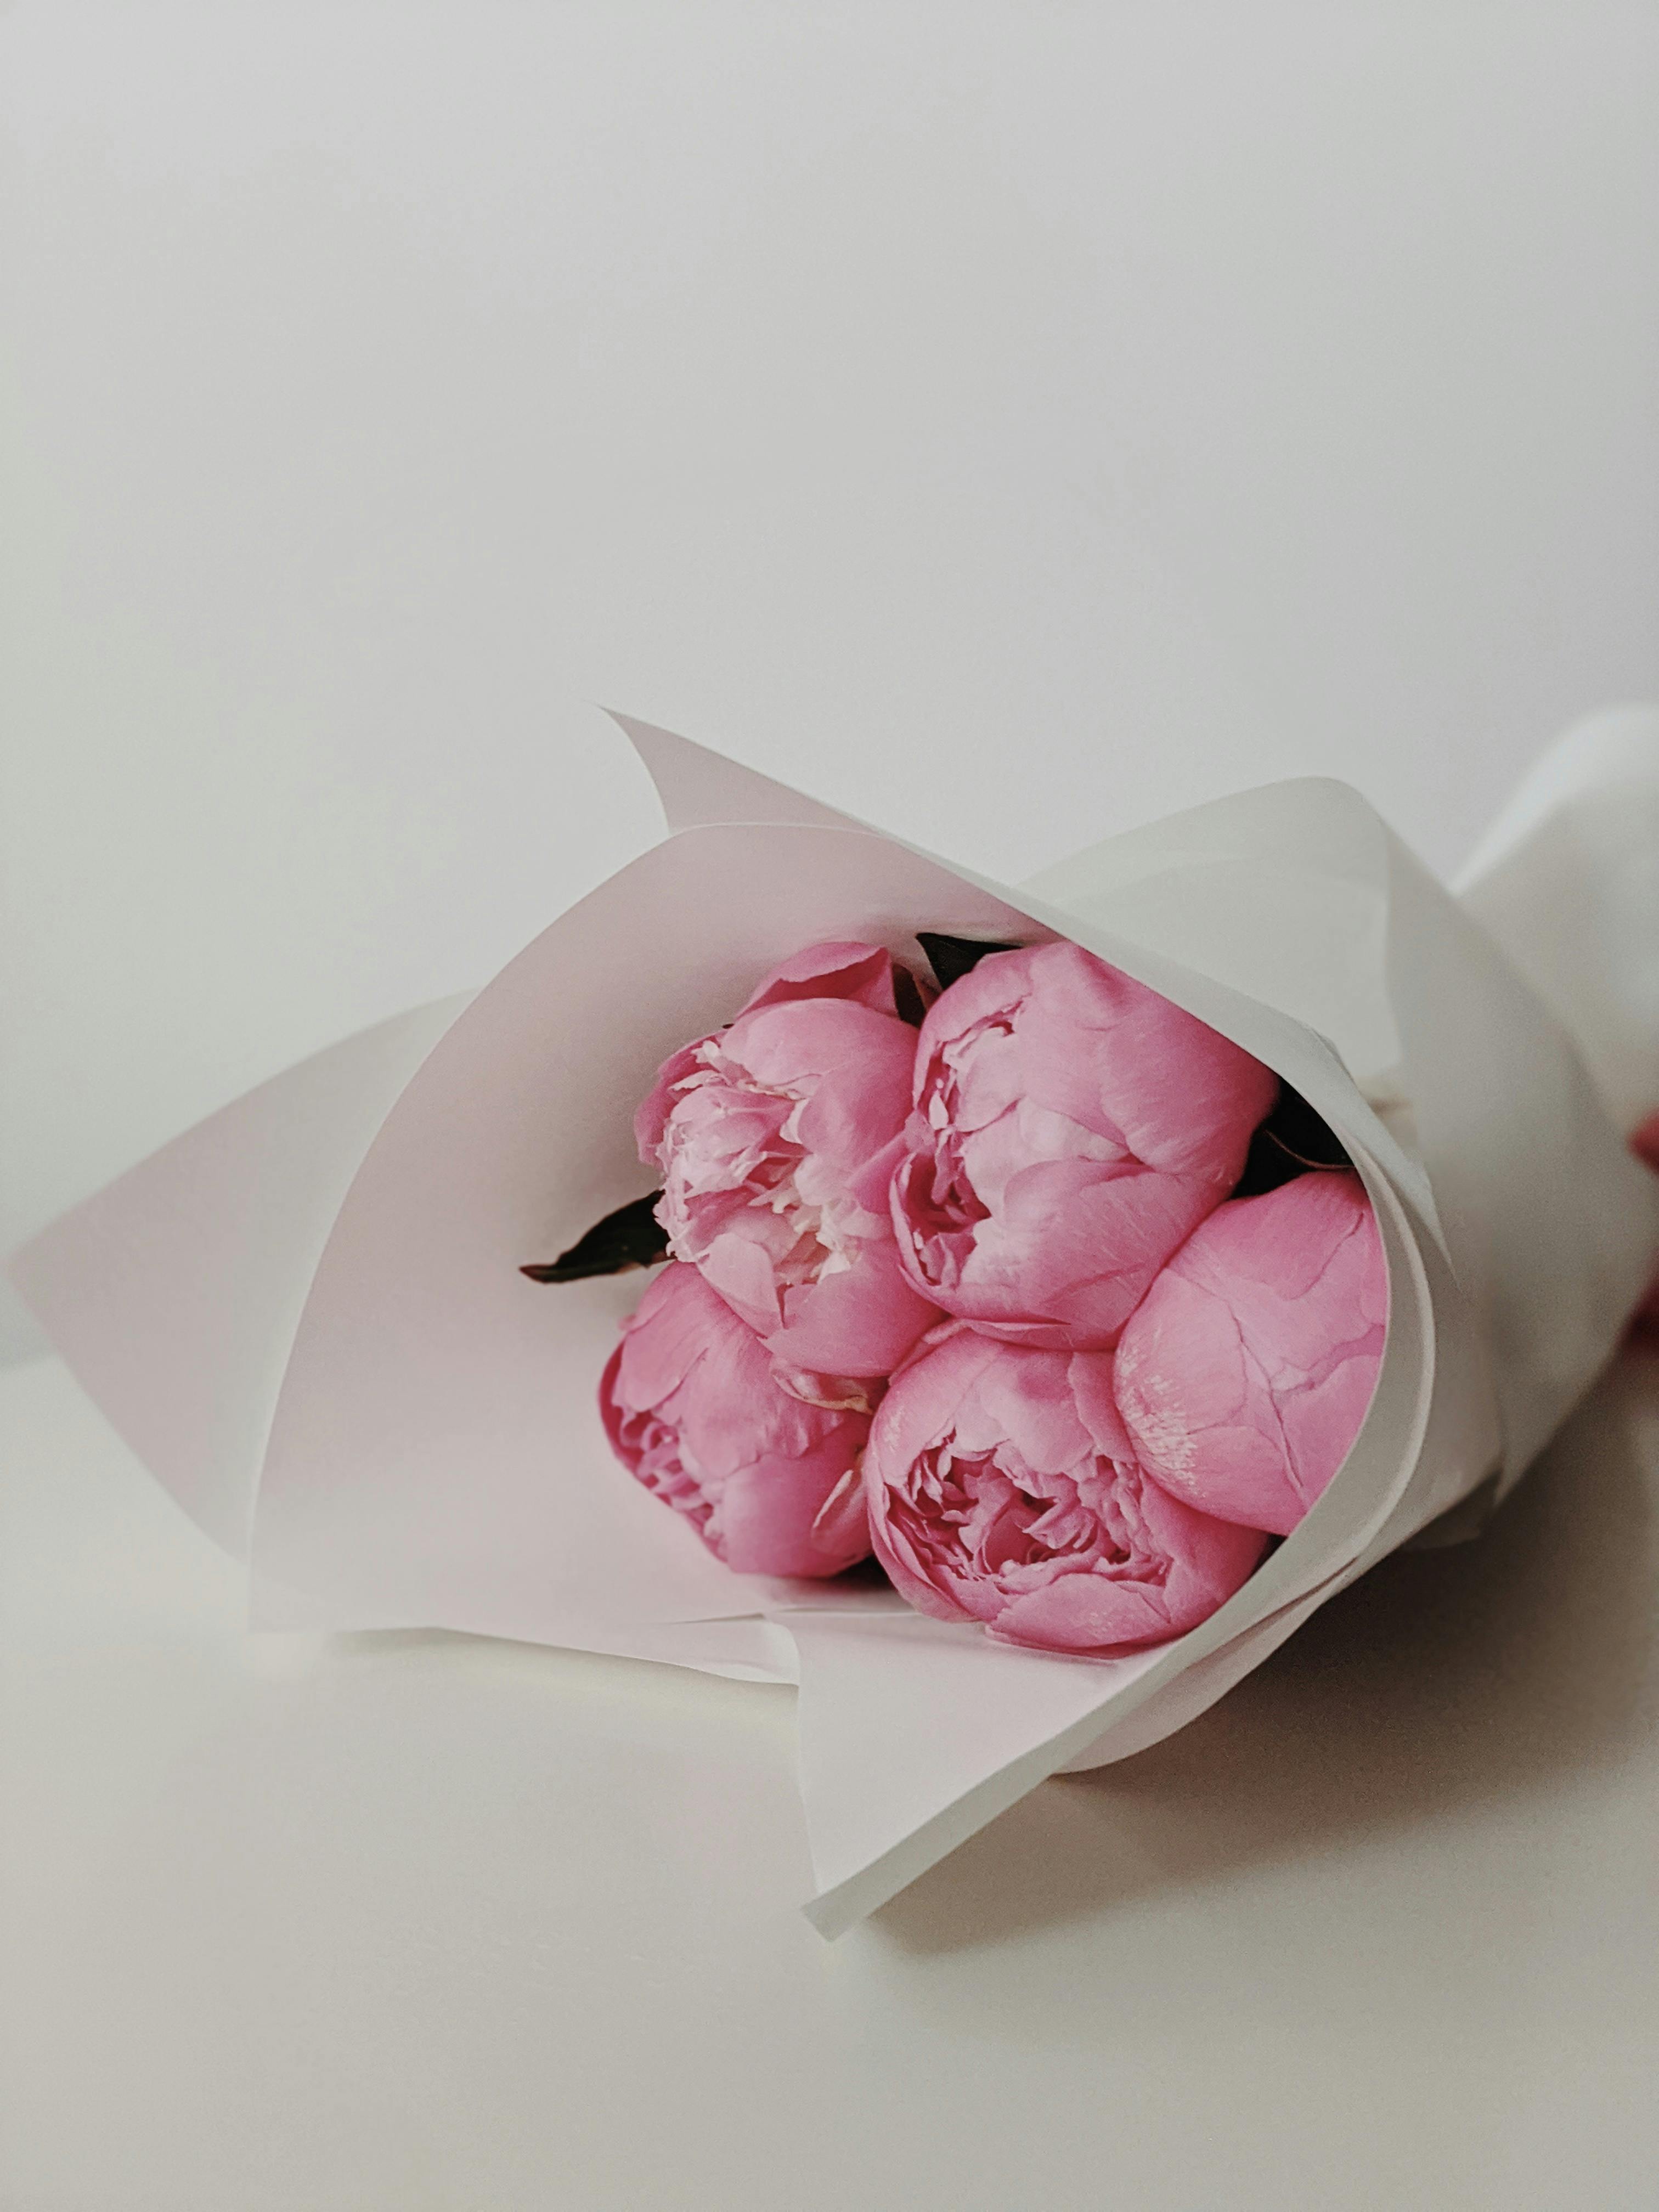 80,000+ Best Pink Flowers Images · 100% Royalty Free Photo Downloads ·  Pexels · Free Stock Photos